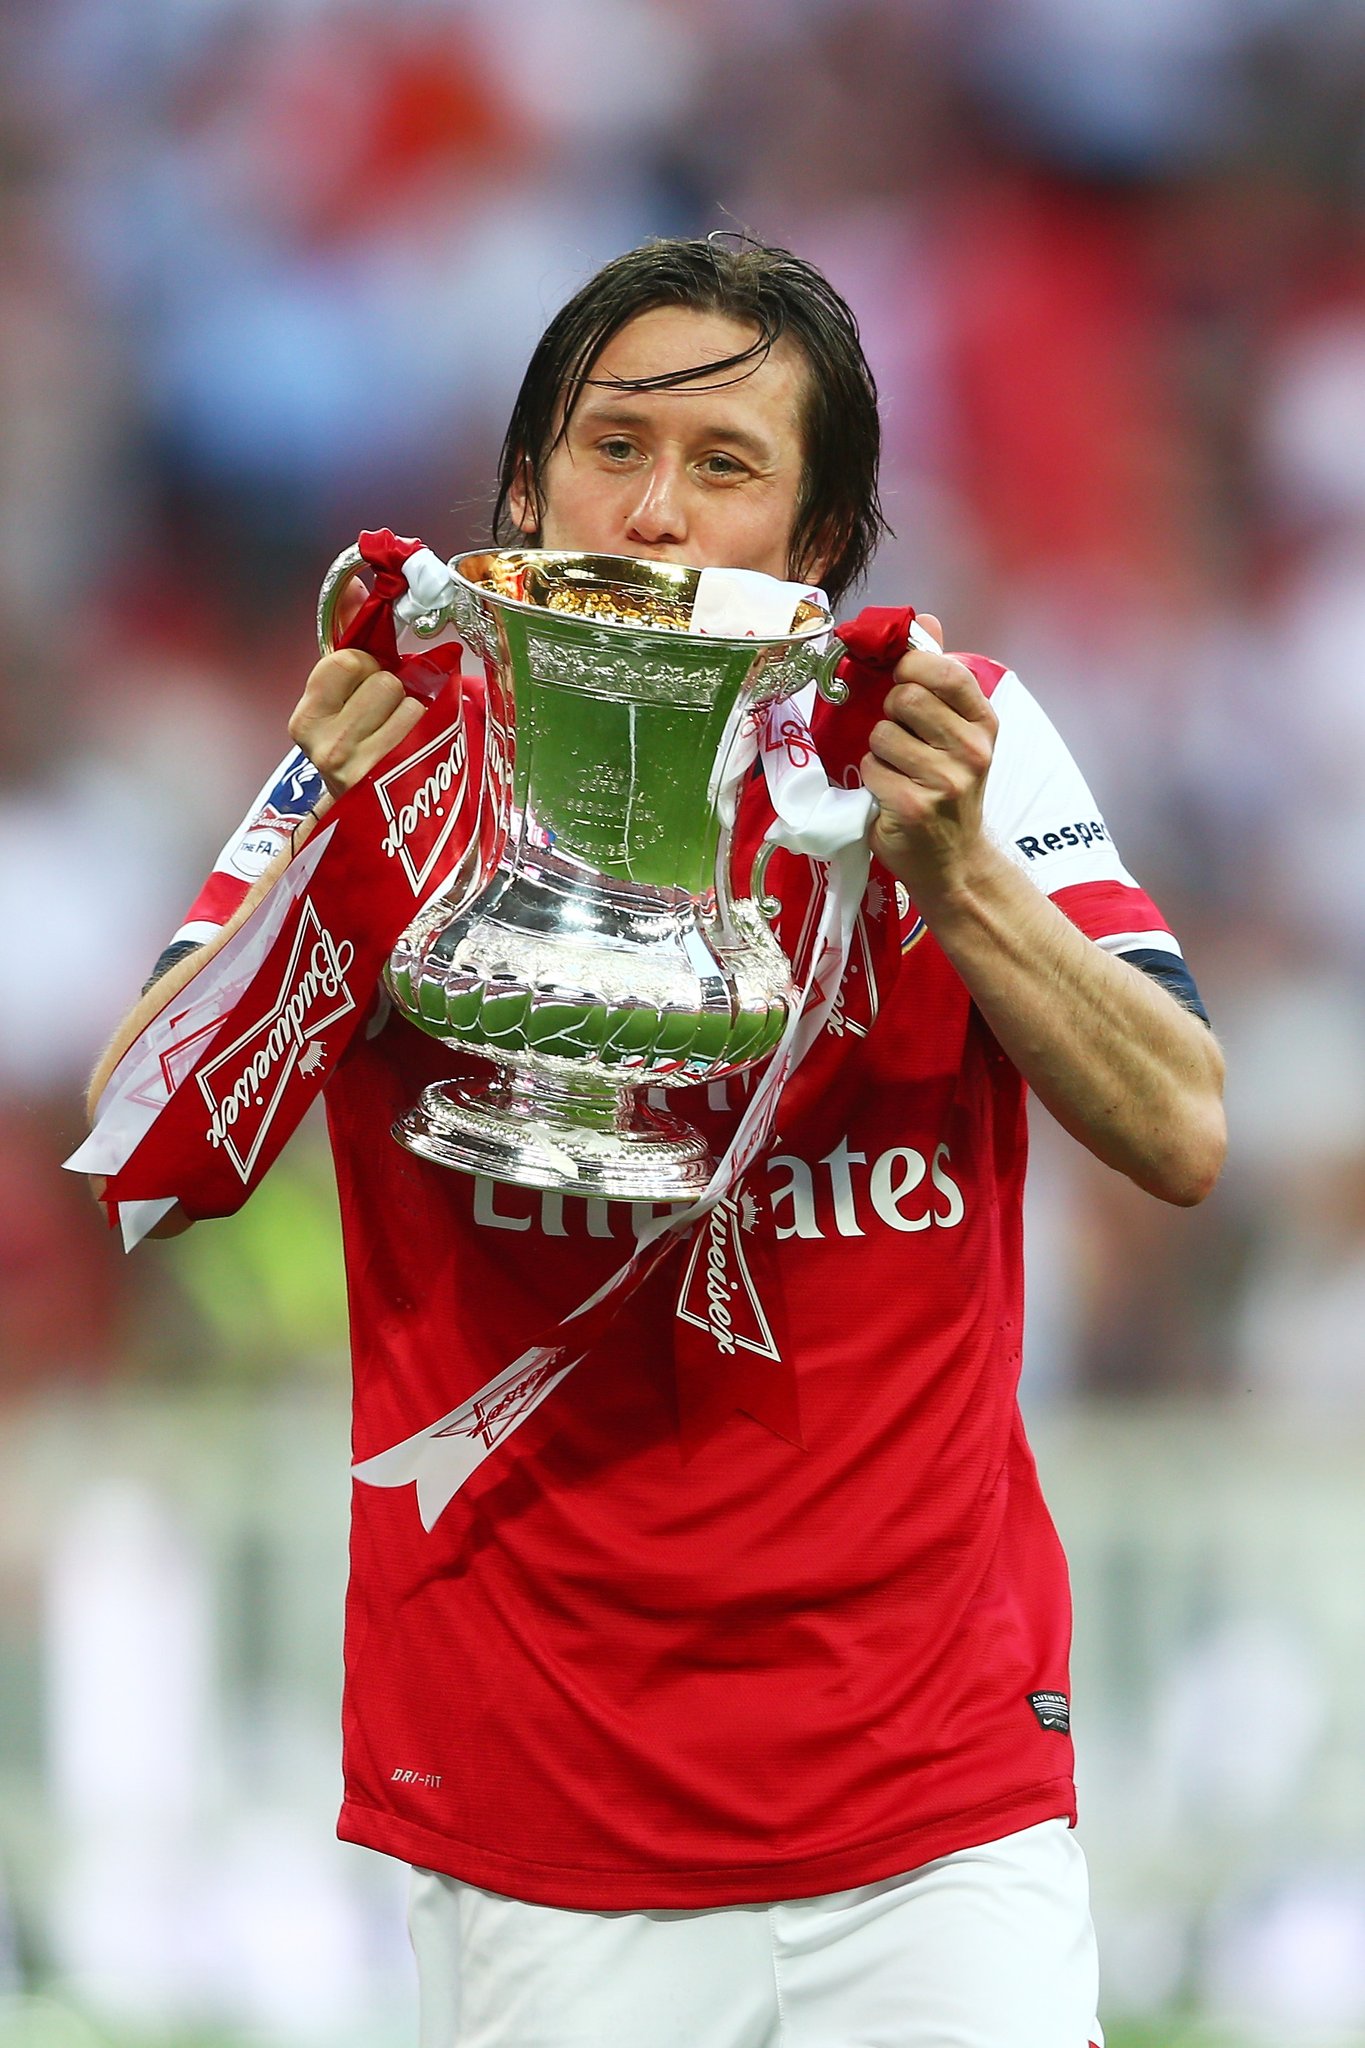 Super Tomas Rosicky Happy birthday to the former man! 